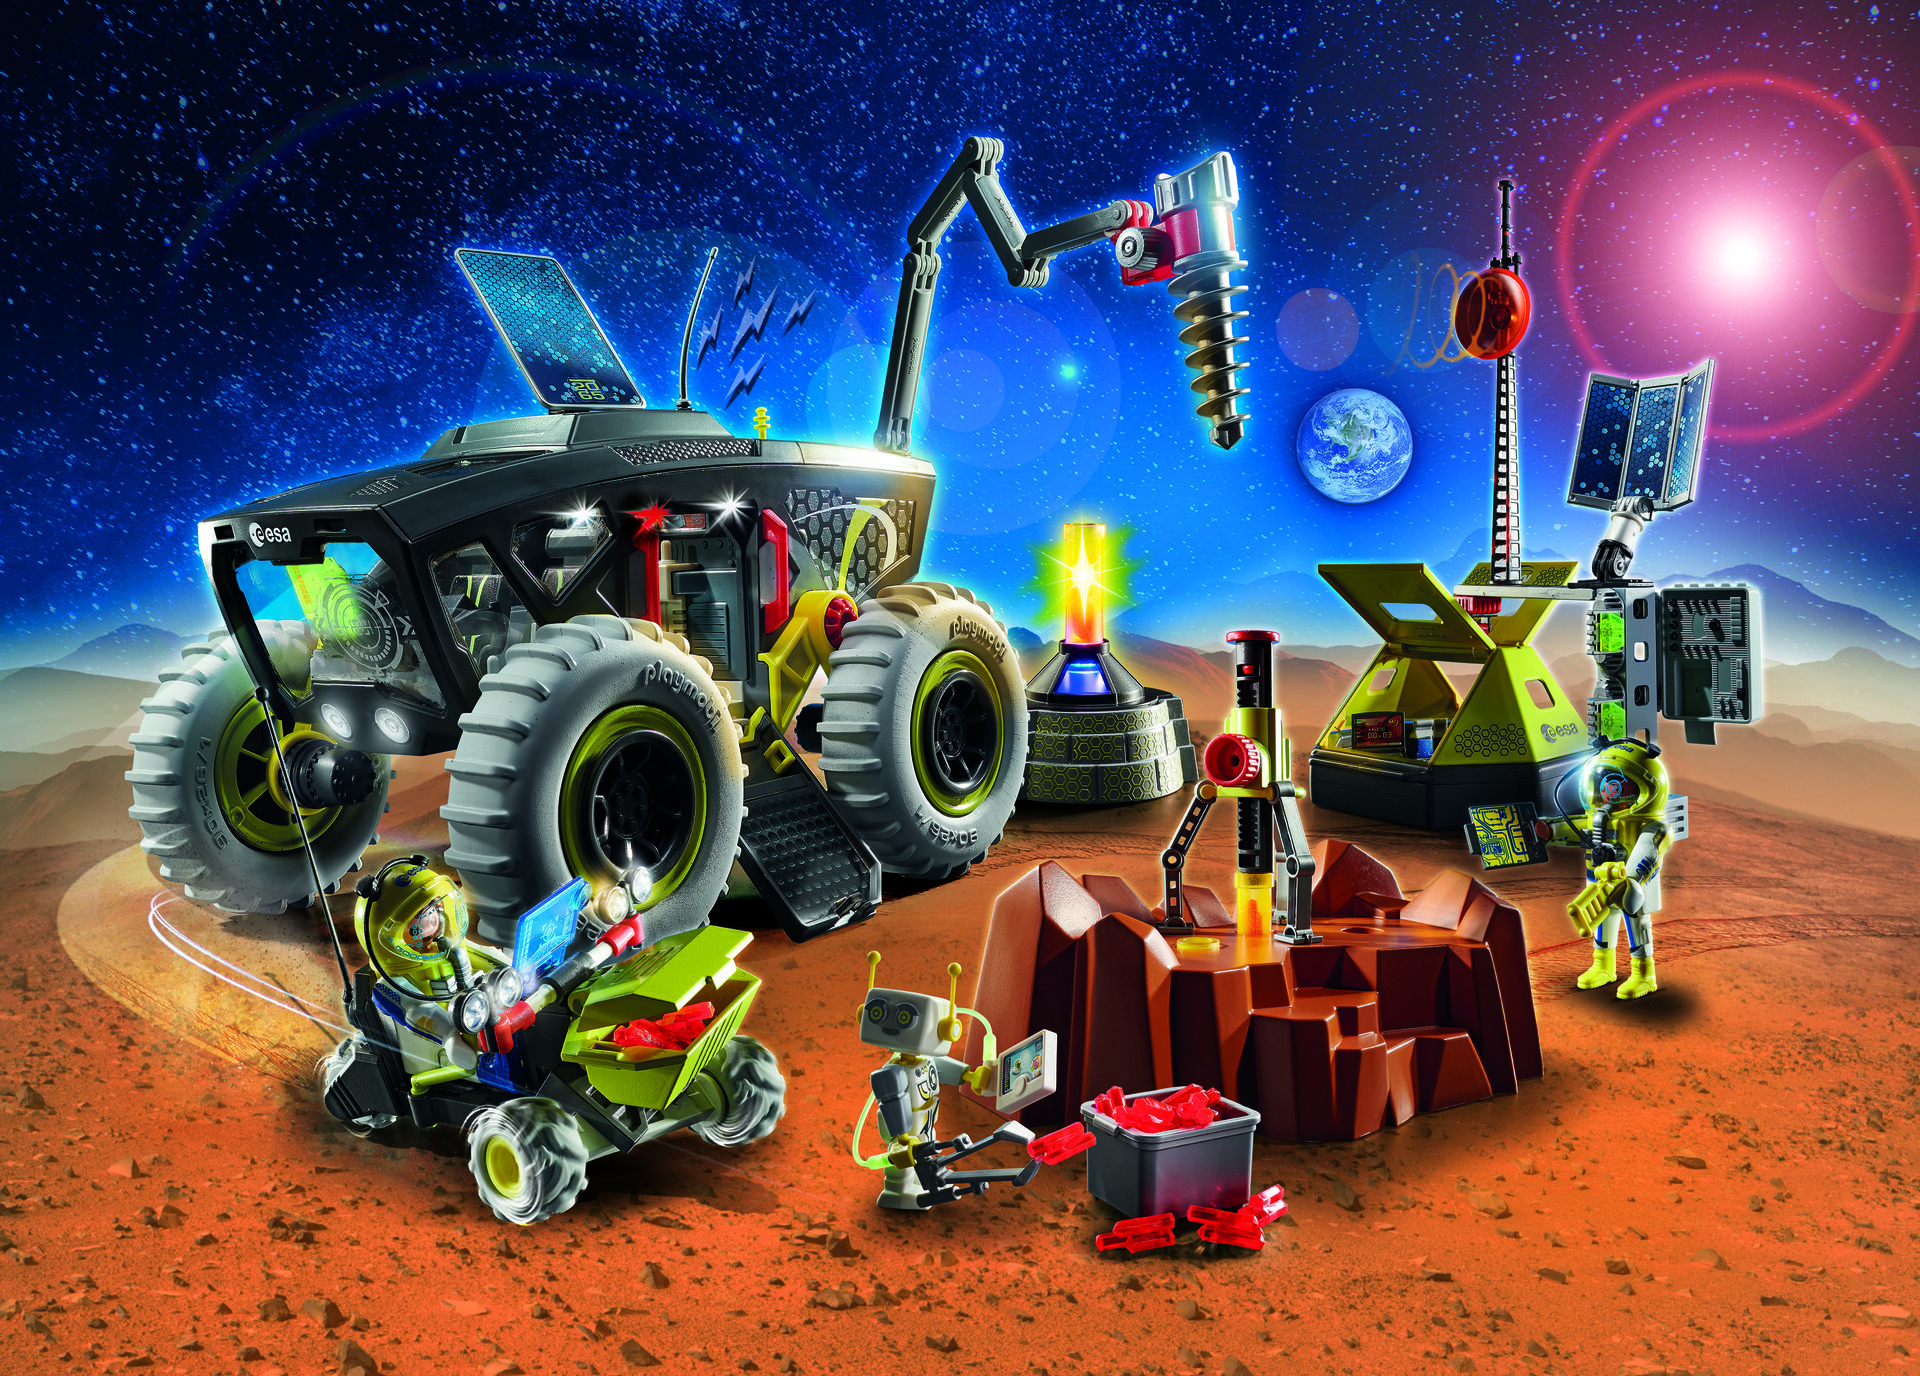 Zonnig Uitwerpselen Taiko buik ESA - Explore the Red Planet with ESA and PLAYMOBIL